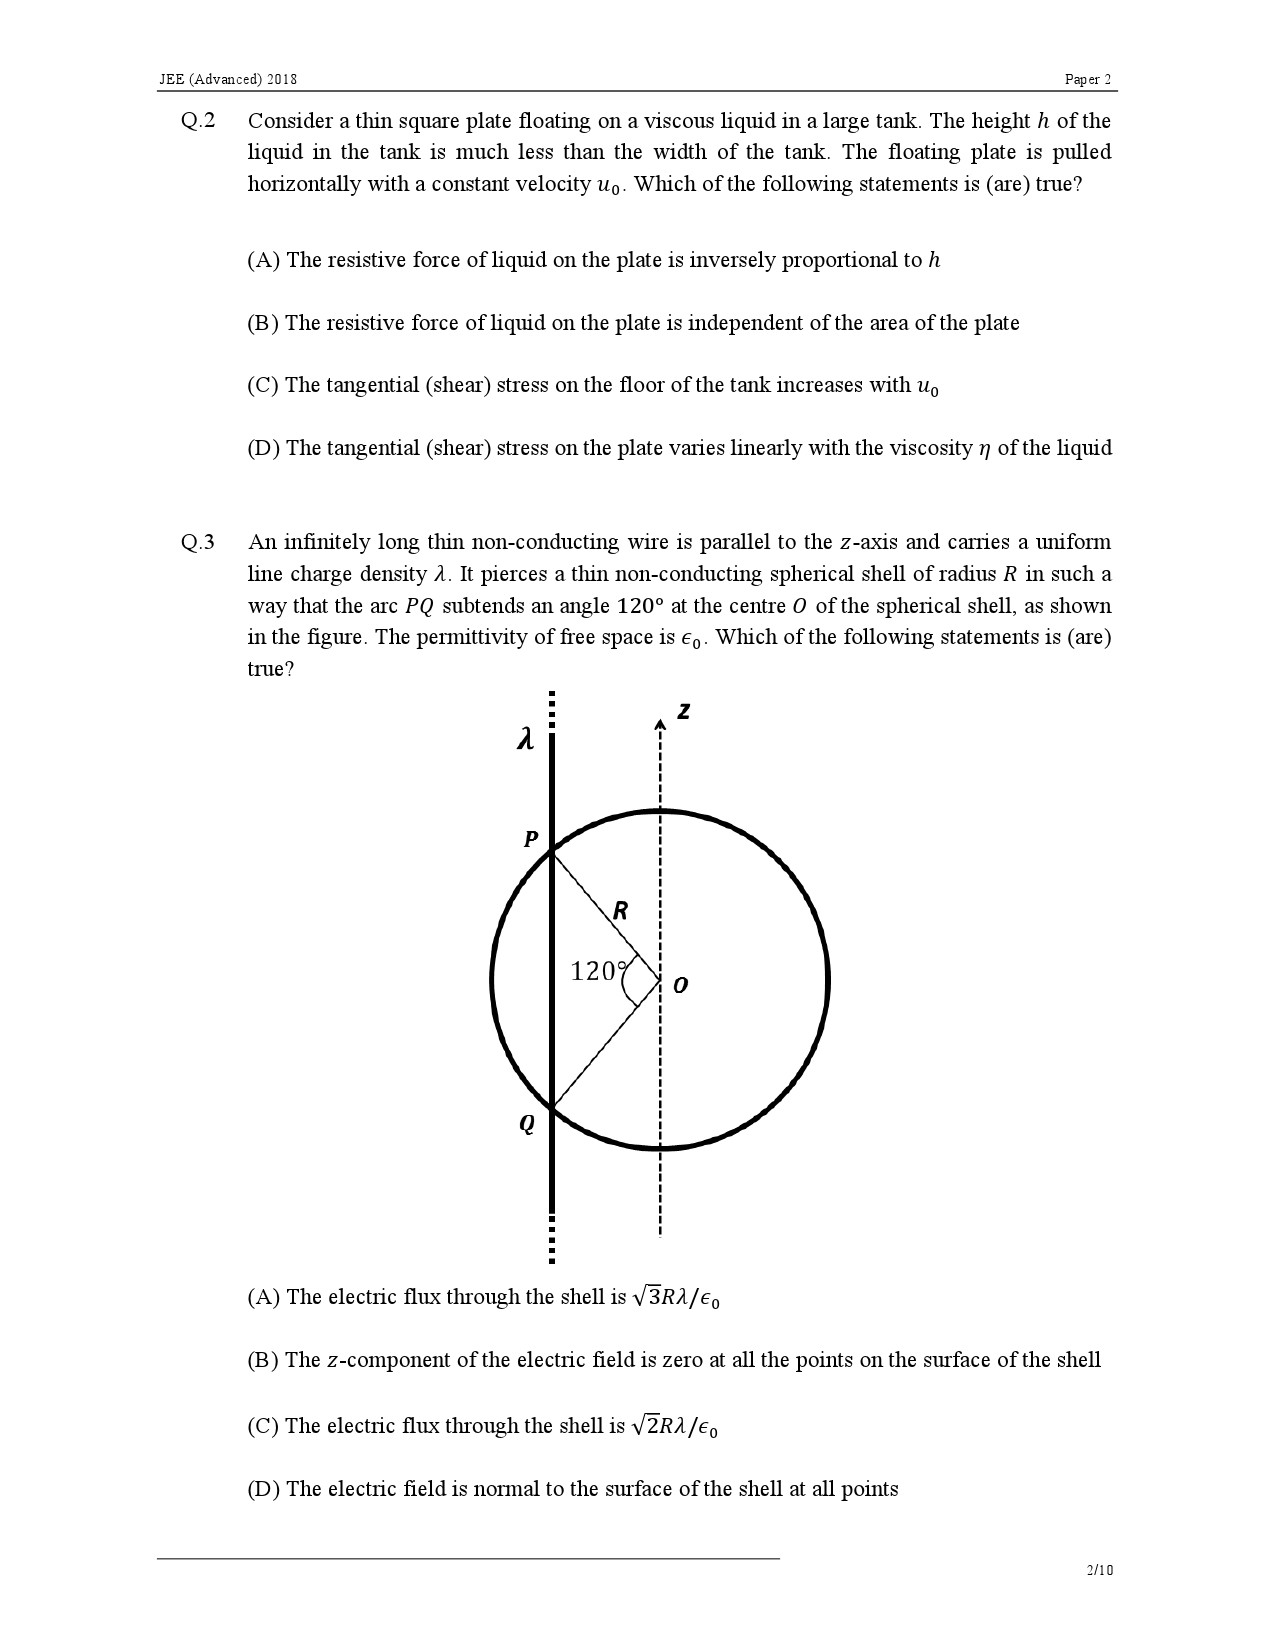 JEE Advanced Exam Question Paper 2018 Paper 2 Physics 2